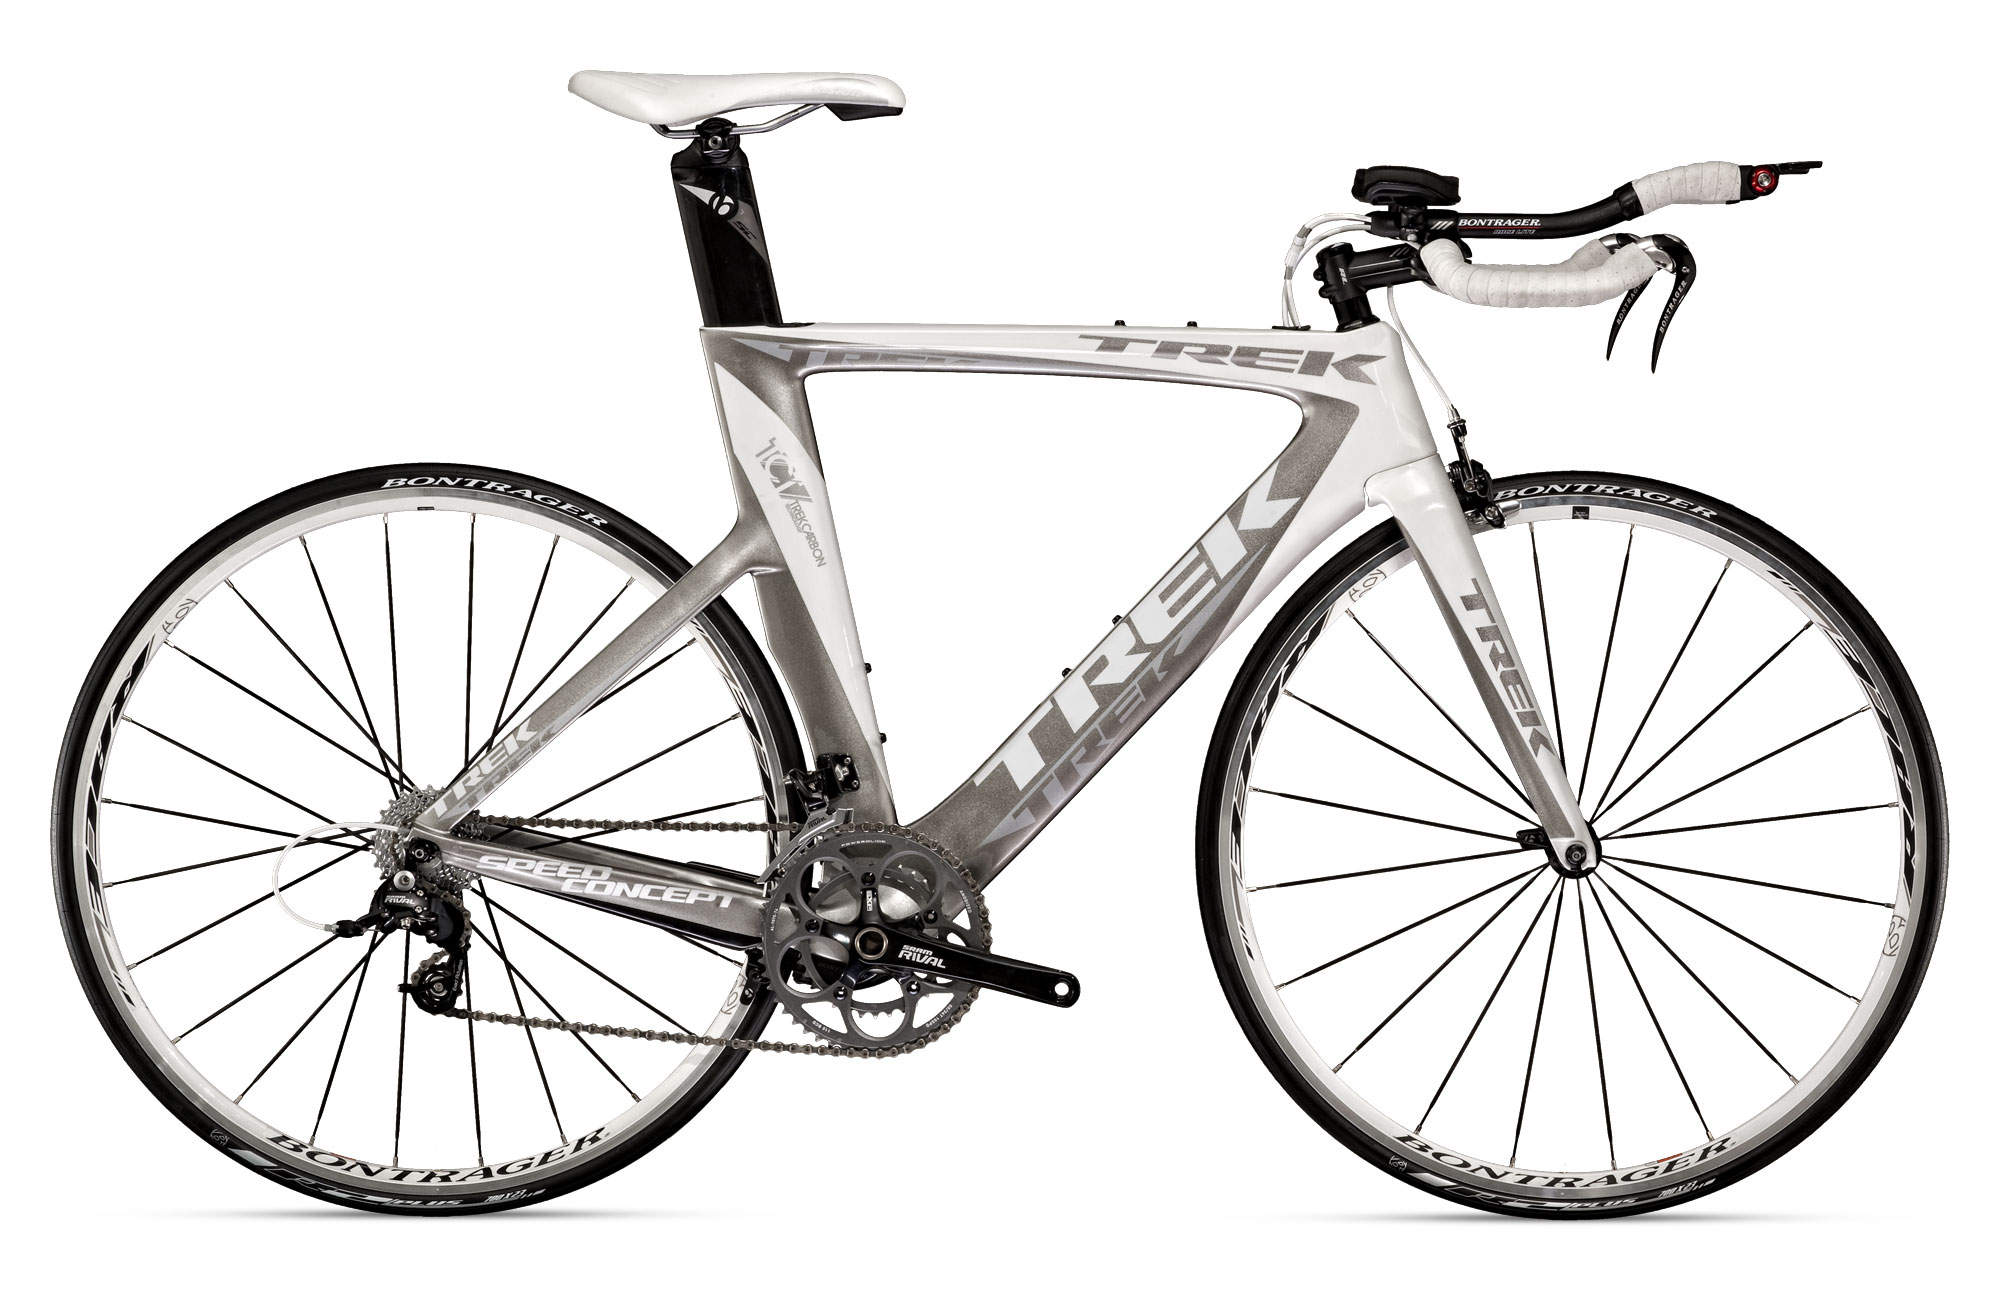 2012 Speed Concept 7.2 First Look and Review